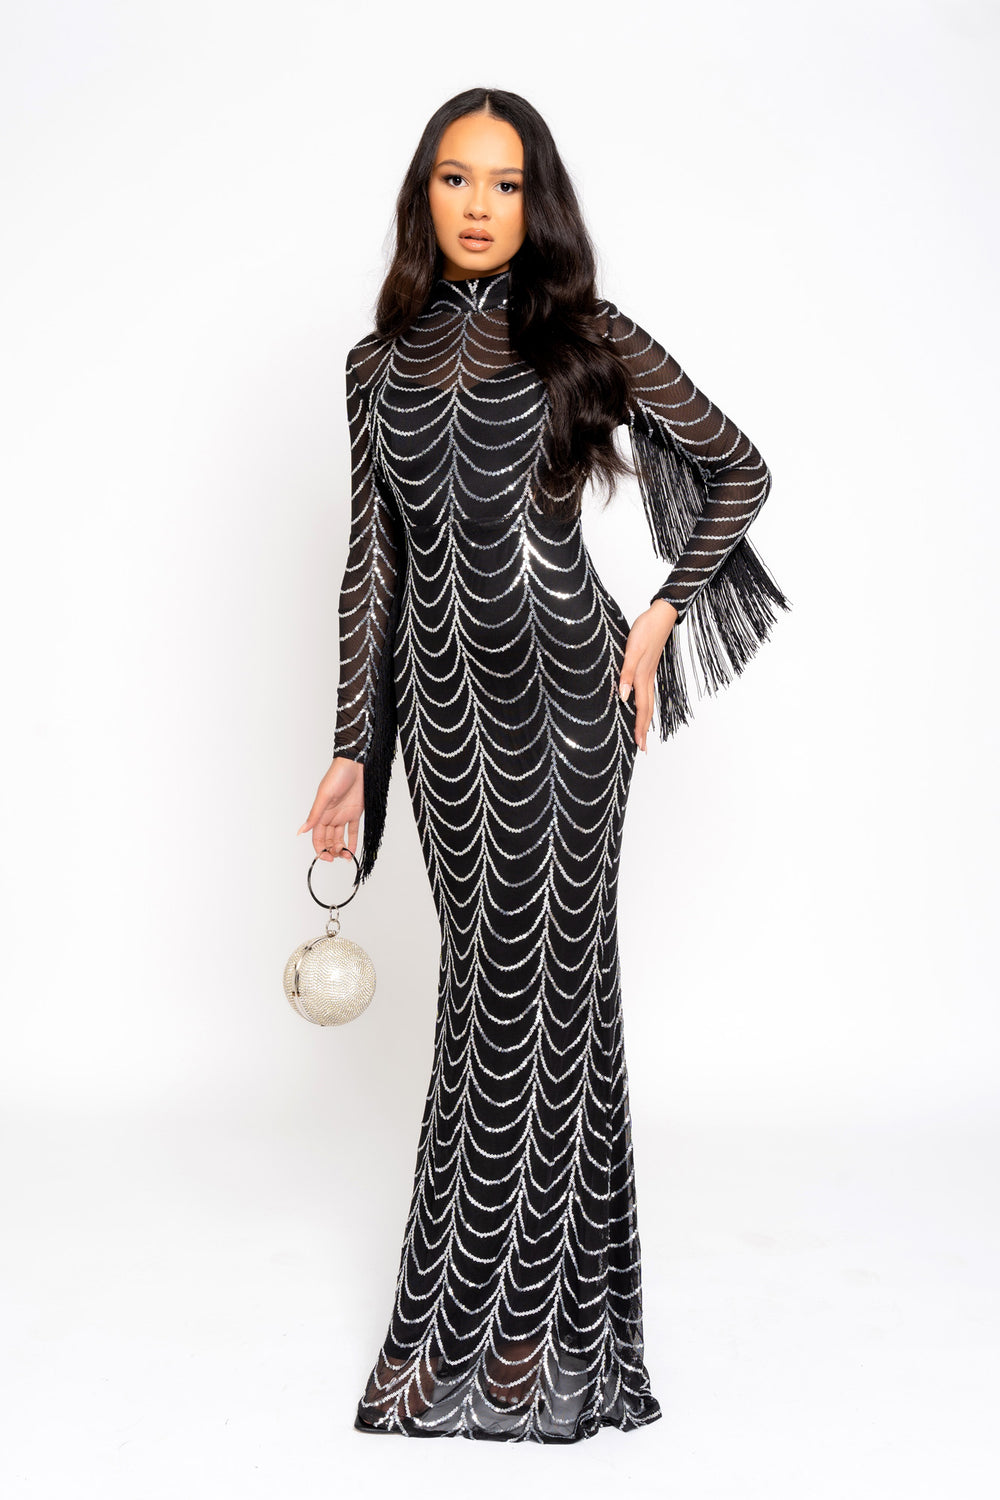 Hypnotic Black Silver Luxe VIP Tassel Fringe Sequin Embellished Illusion Long Sleeve Maxi Dress